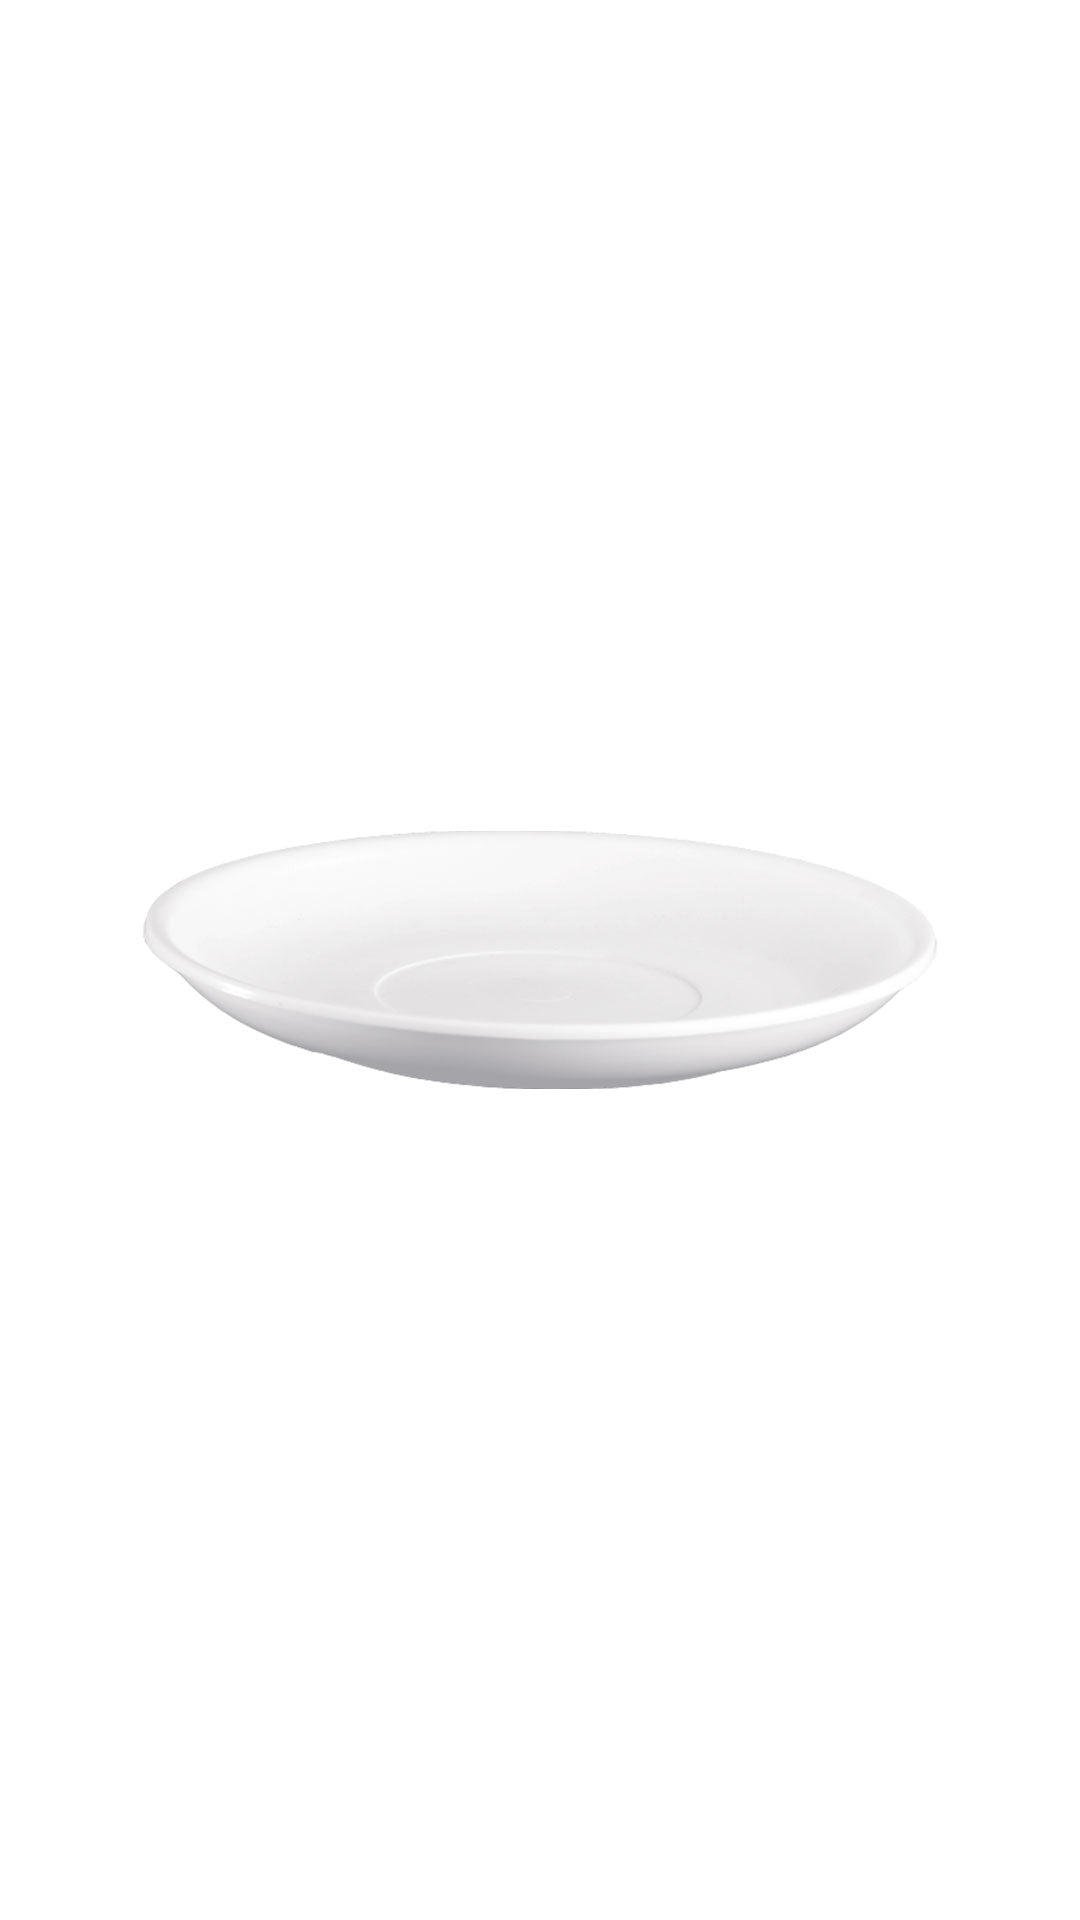 Experience sophistication and convenience with our Plastic Continental Liner Plate. Crafted from high-quality plastic, this plate combines elegant design with practical functionality.